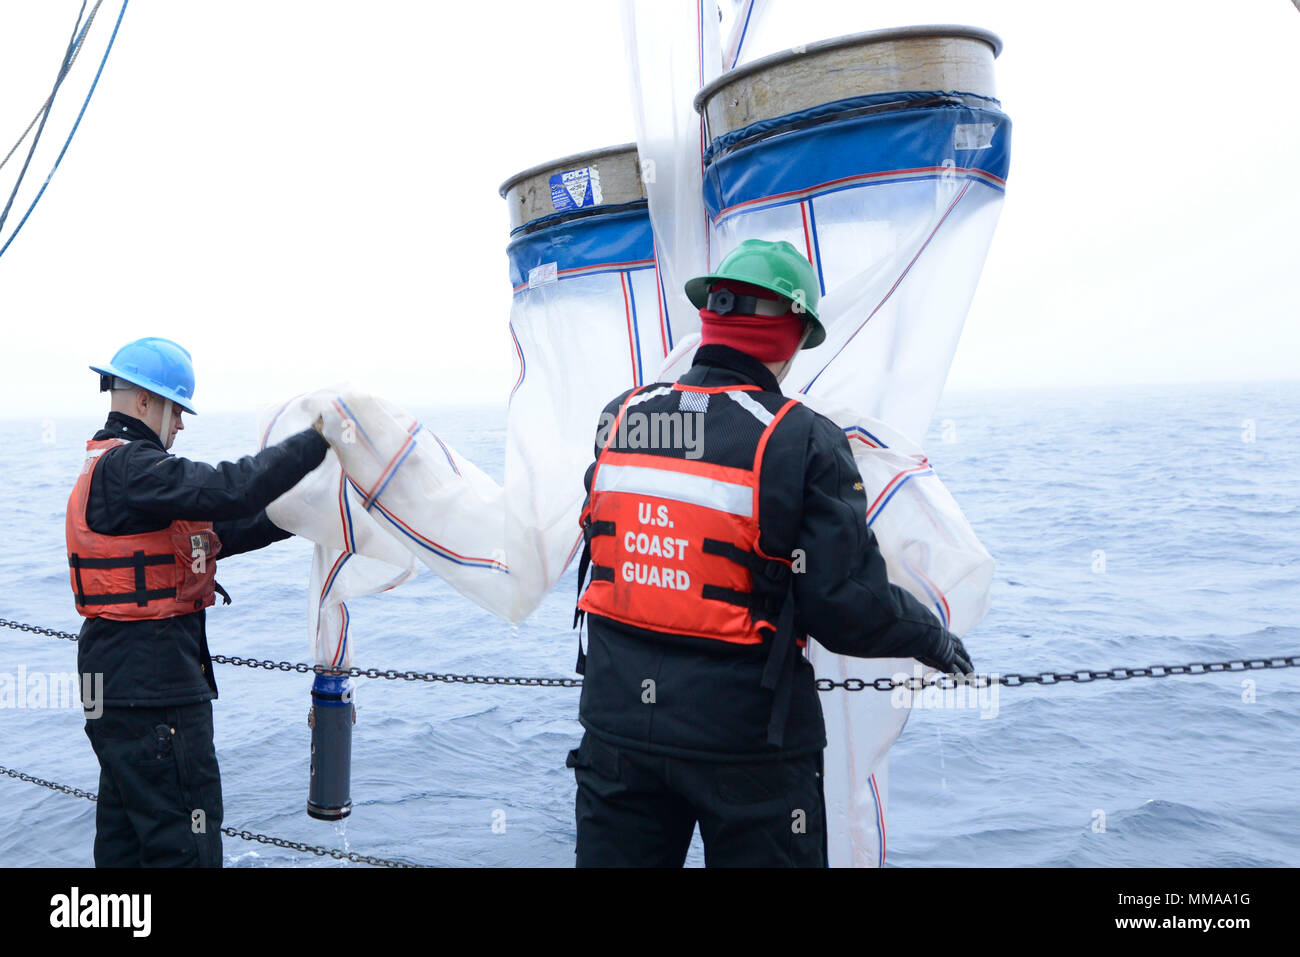 Coast Guard Petty Officer 2nd Class Ed Traver and Coast Guard Seaman Grayden Boad retrieve a bongo net tow after they had been deployed behind the Coast Guard Cutter Healy as part of research operations in the Arctic, Tuesday, Sept. 5, 2017    Used primary to collect samples of zooplankton, this tow consists of four collection nets and is comprised of two larger nets and two smaller nets, with the smaller nets also made out of a finer mesh.    U.S. Coast Guard photo by Petty Officer 3rd Class Amanda Norcross Stock Photo